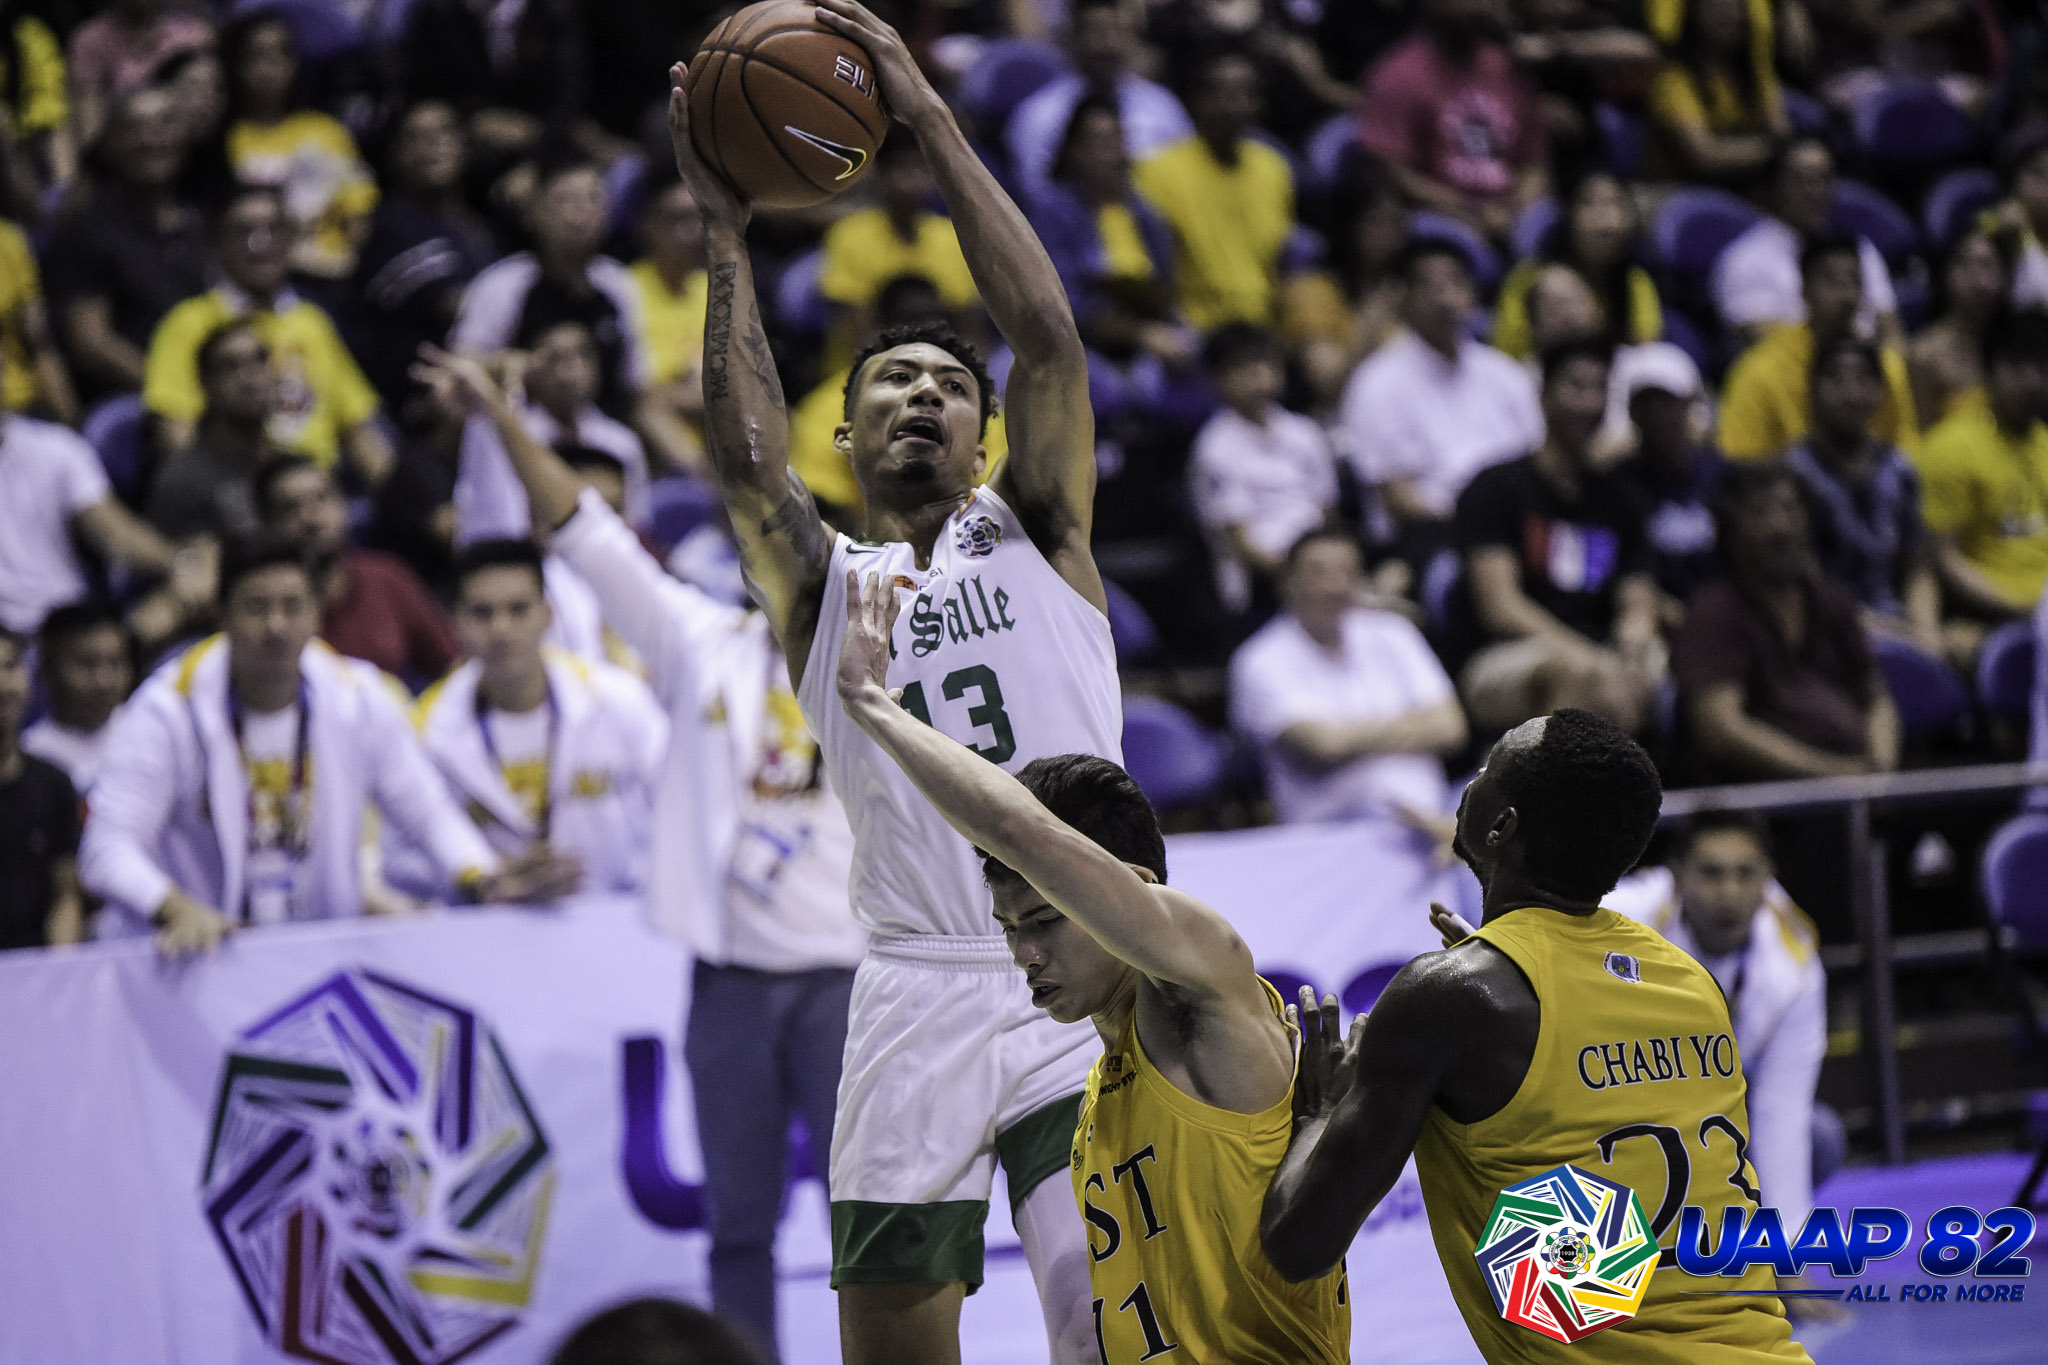 La Salle weathers UST's late run to keep Final 4 hopes alive